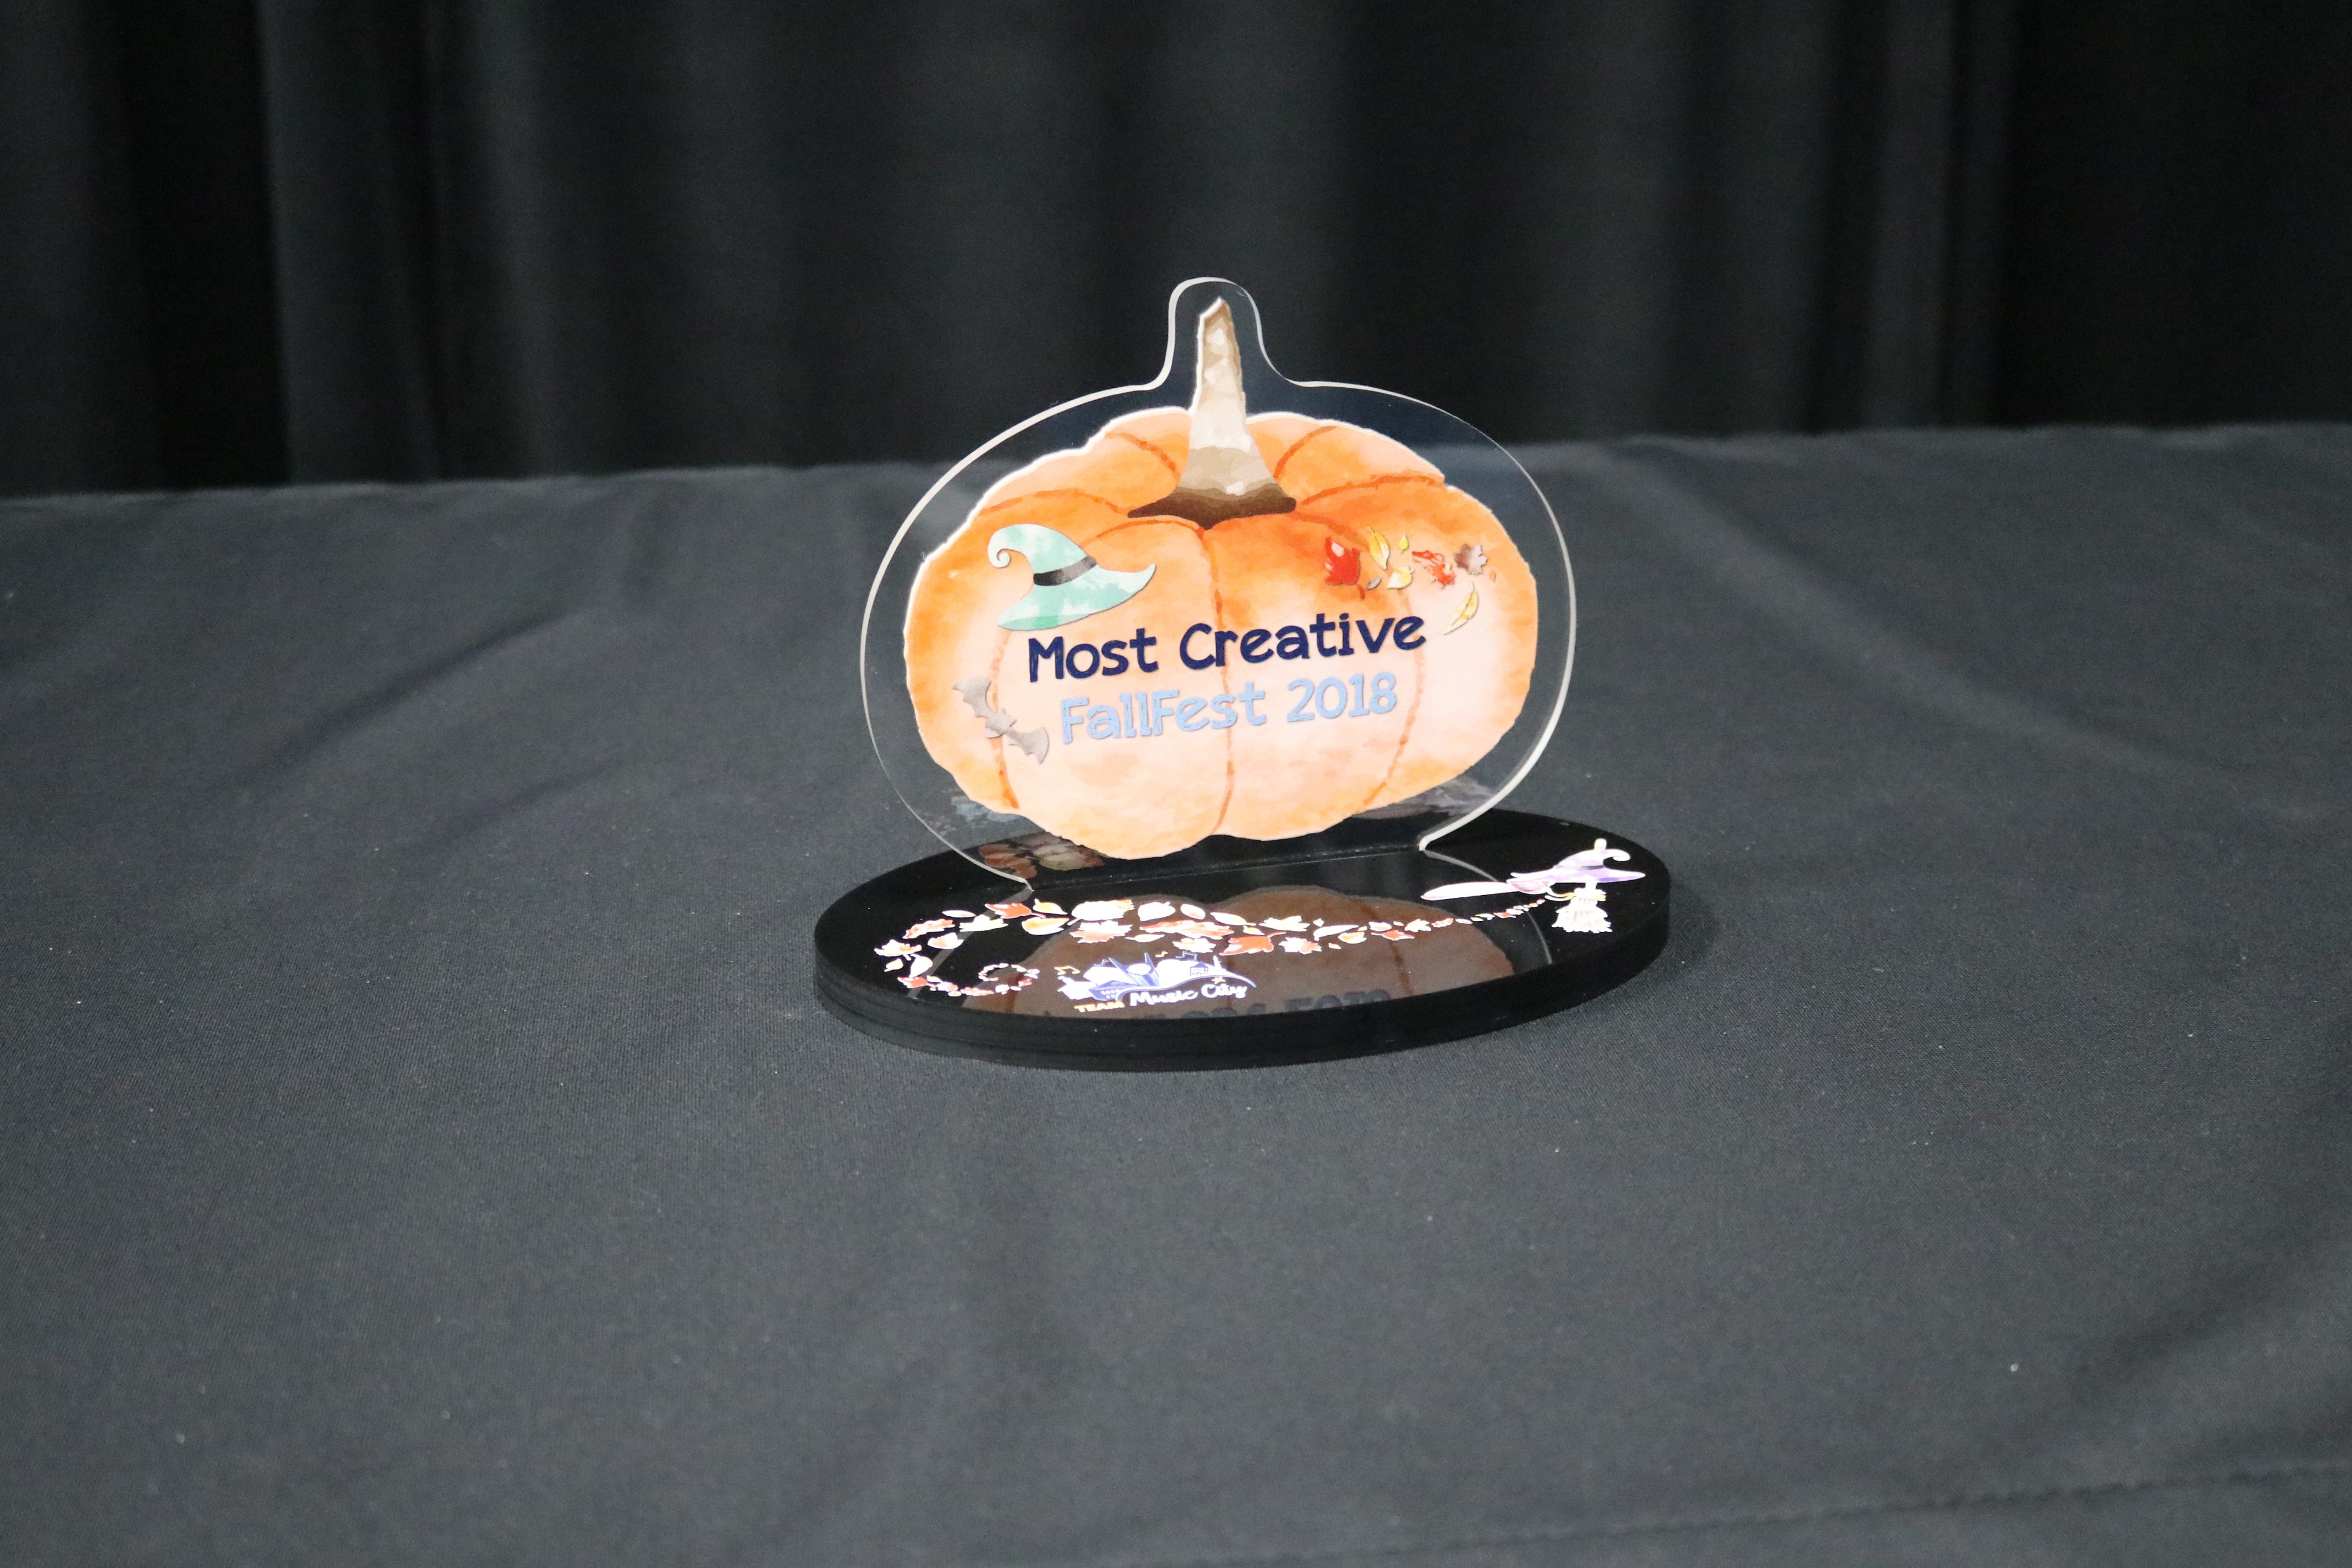 Acrylic award with printed pumpkin on clear acrylic inserted into black base with design printed on.